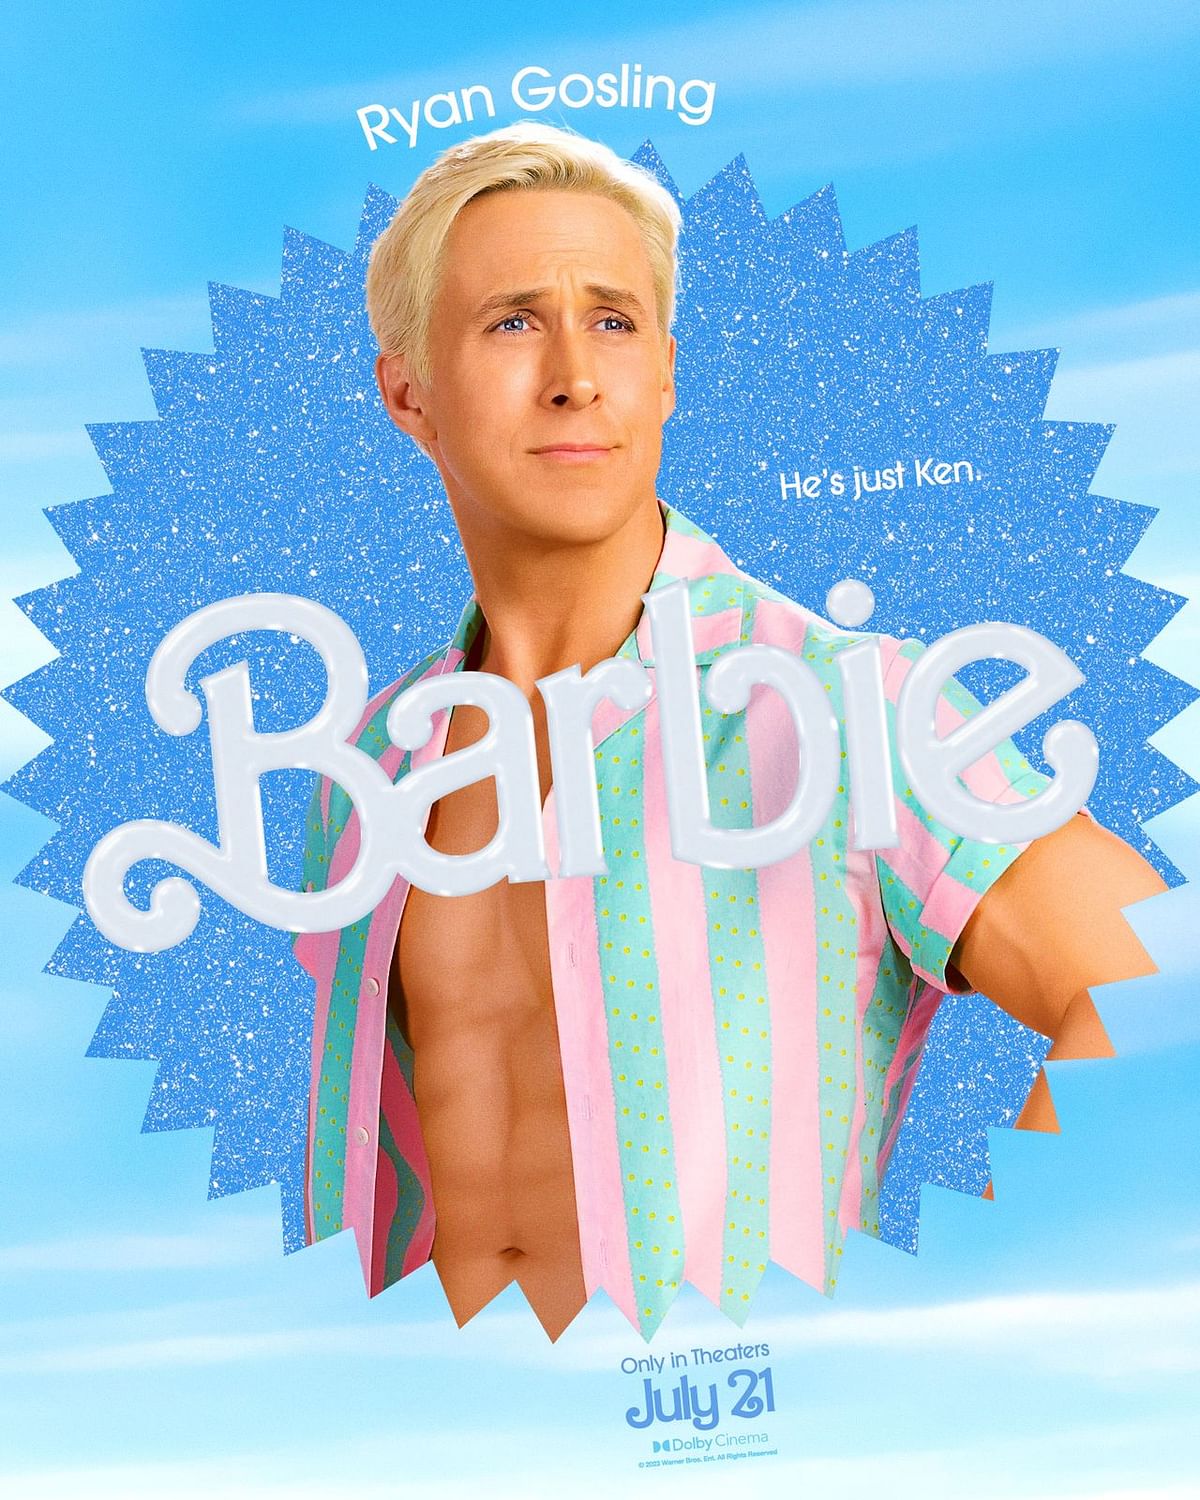 Who would you cast in Barbie's Indian remake?